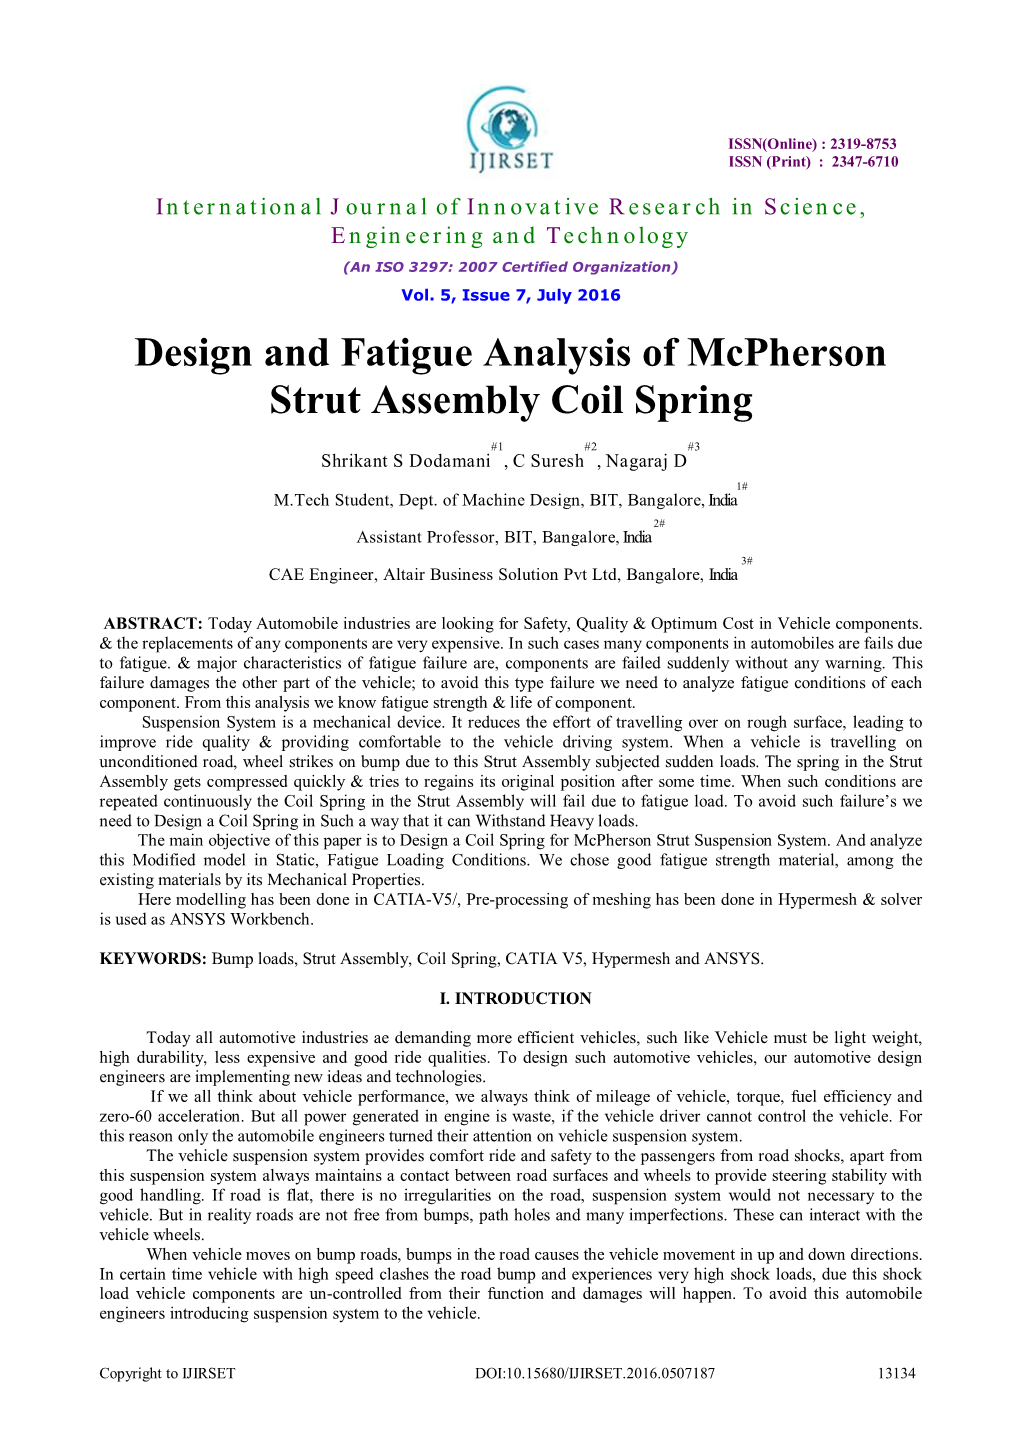 Design and Fatigue Analysis of Mcpherson Strut Assembly Coil Spring